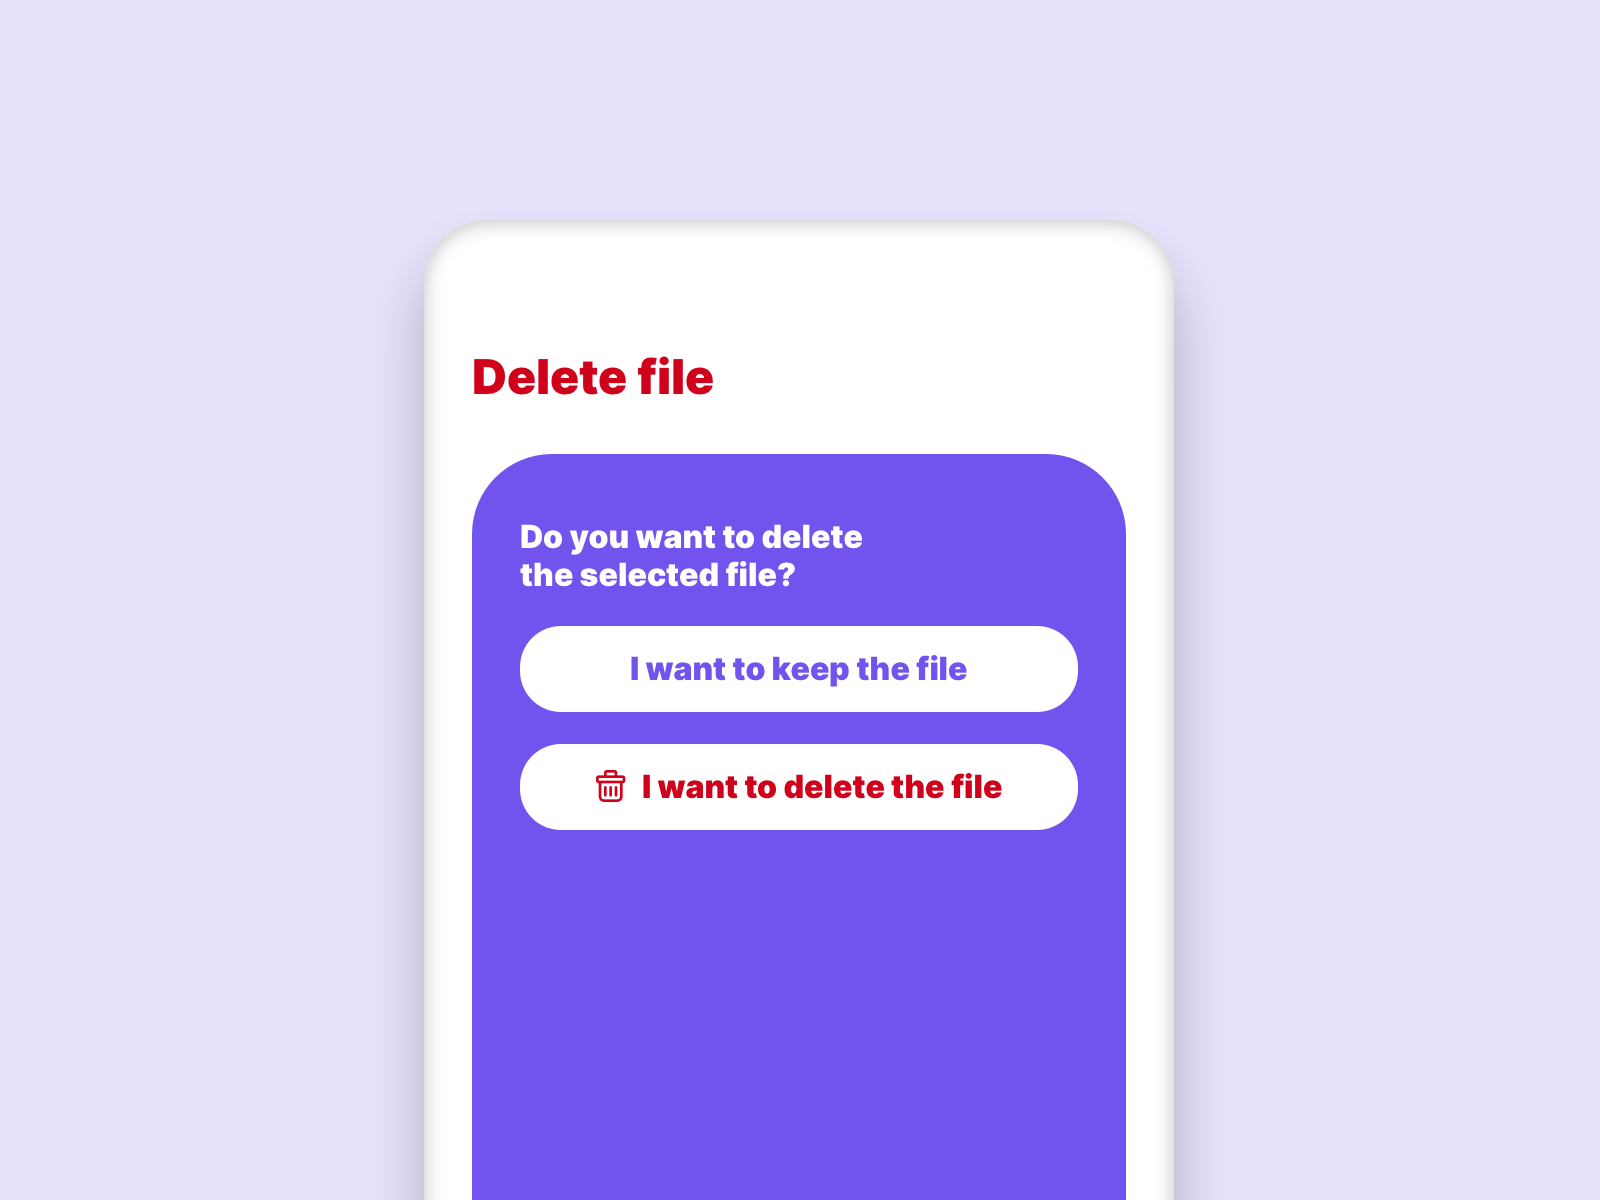 The image shows the deleting process of a file. The system asks the user if they really want to delete the file.